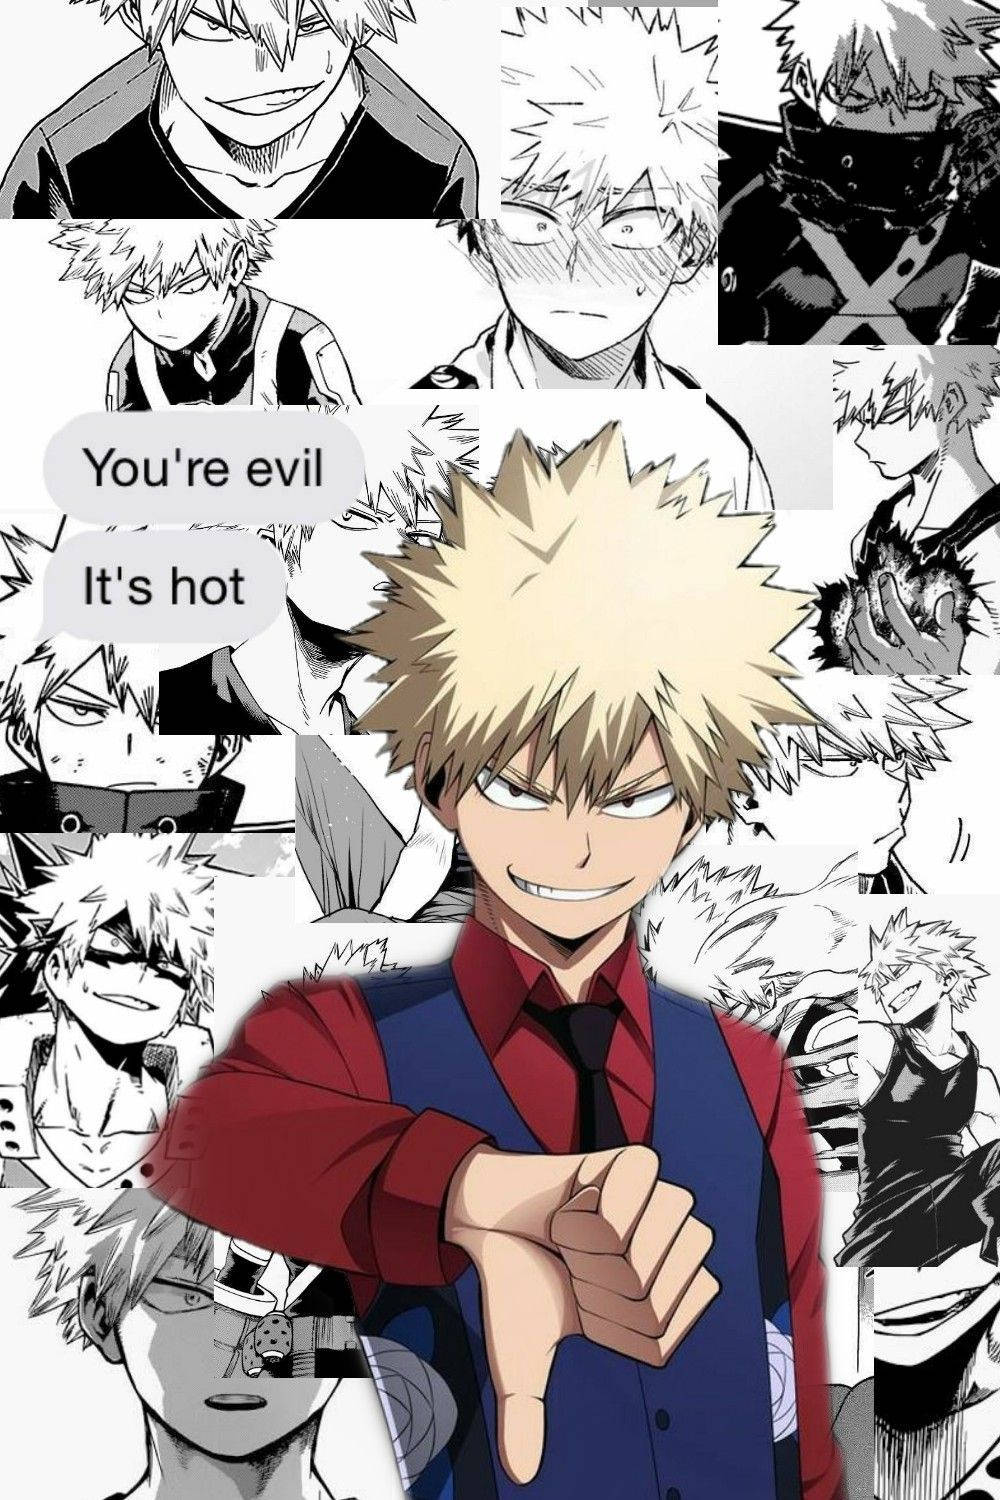 Cute Bakugou Melting Hearts With His Adorably Playful Expression